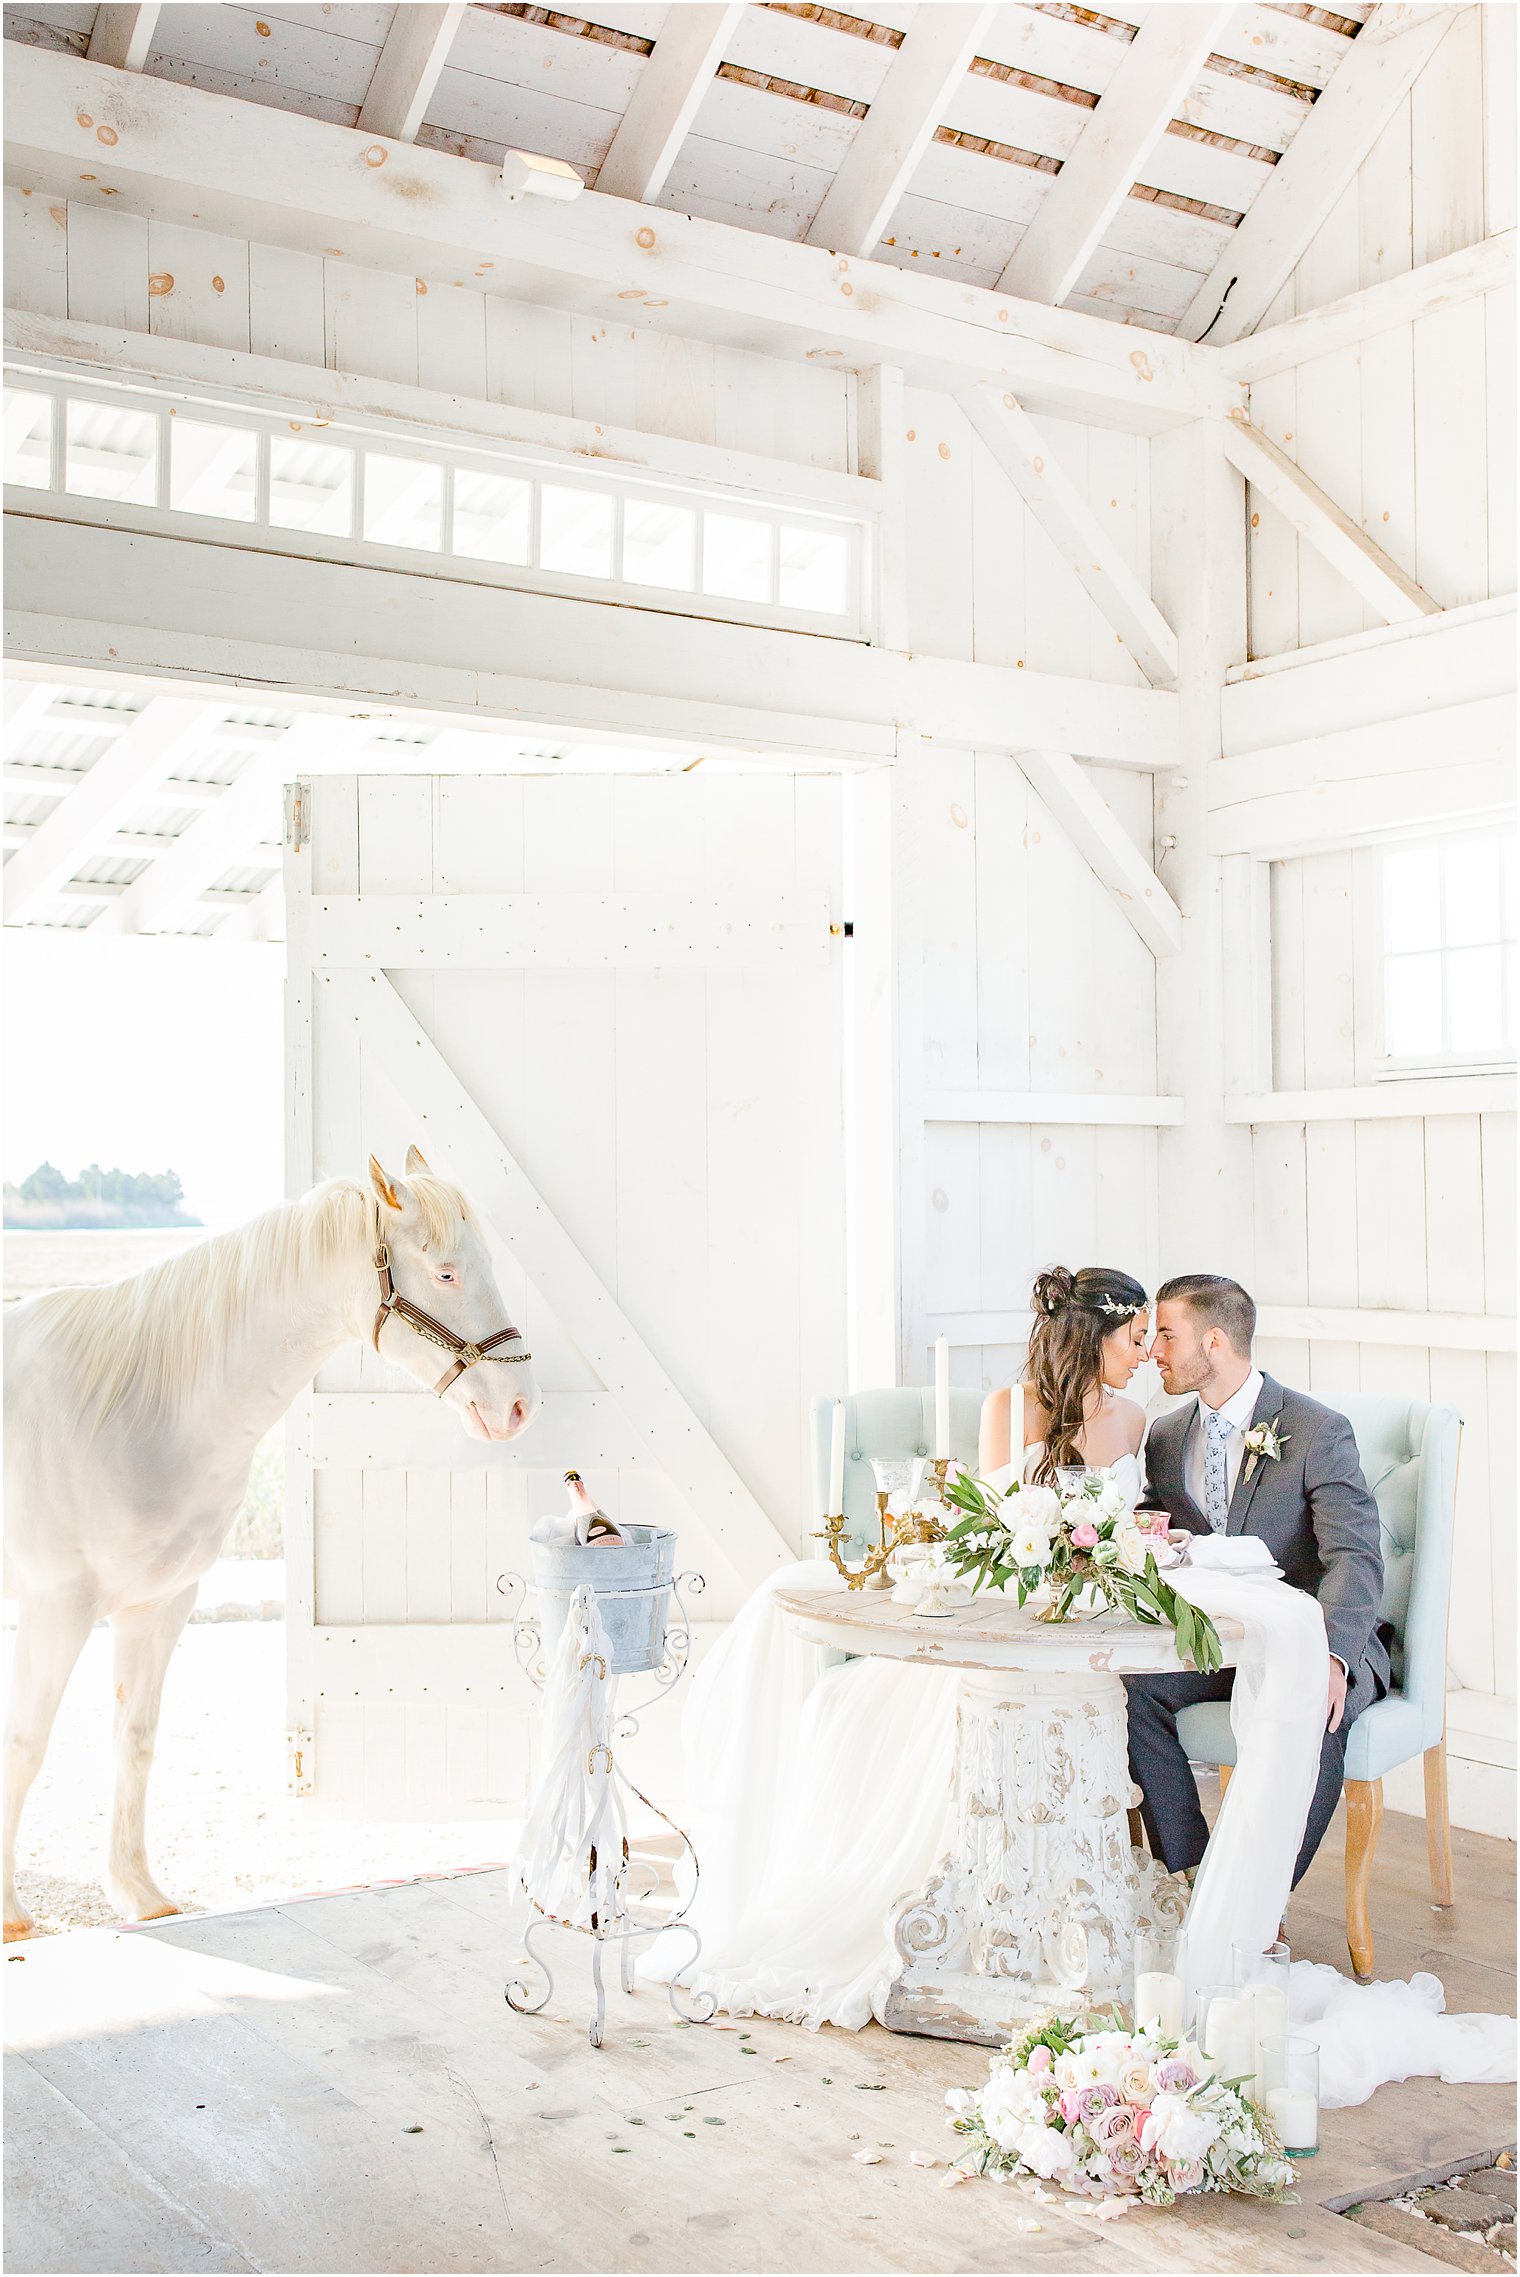 Styled shoot with horse